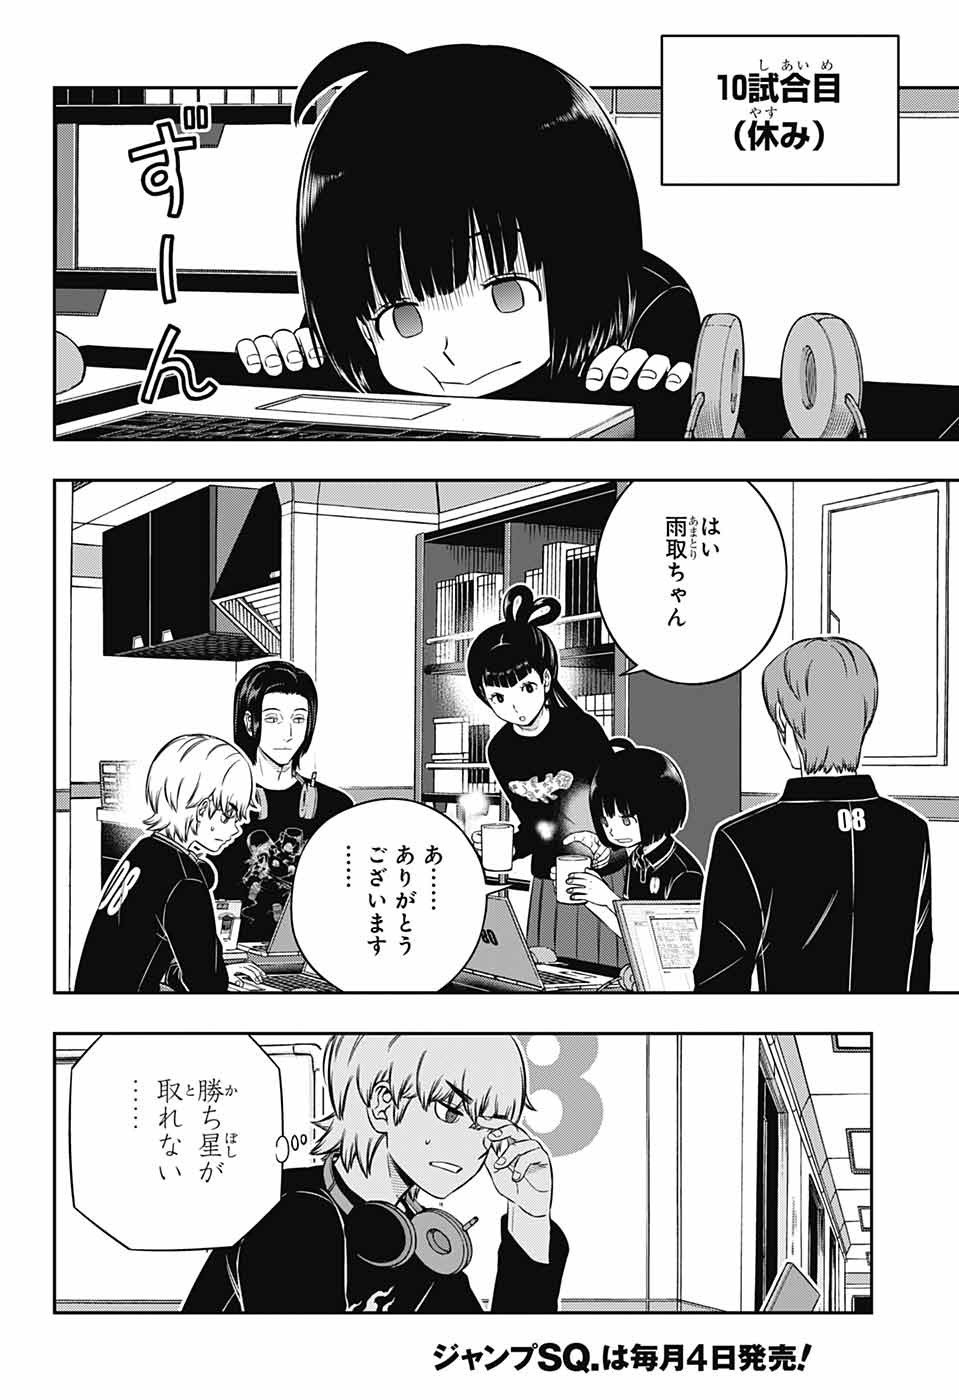 World Trigger - Chapter 233 - Page 2